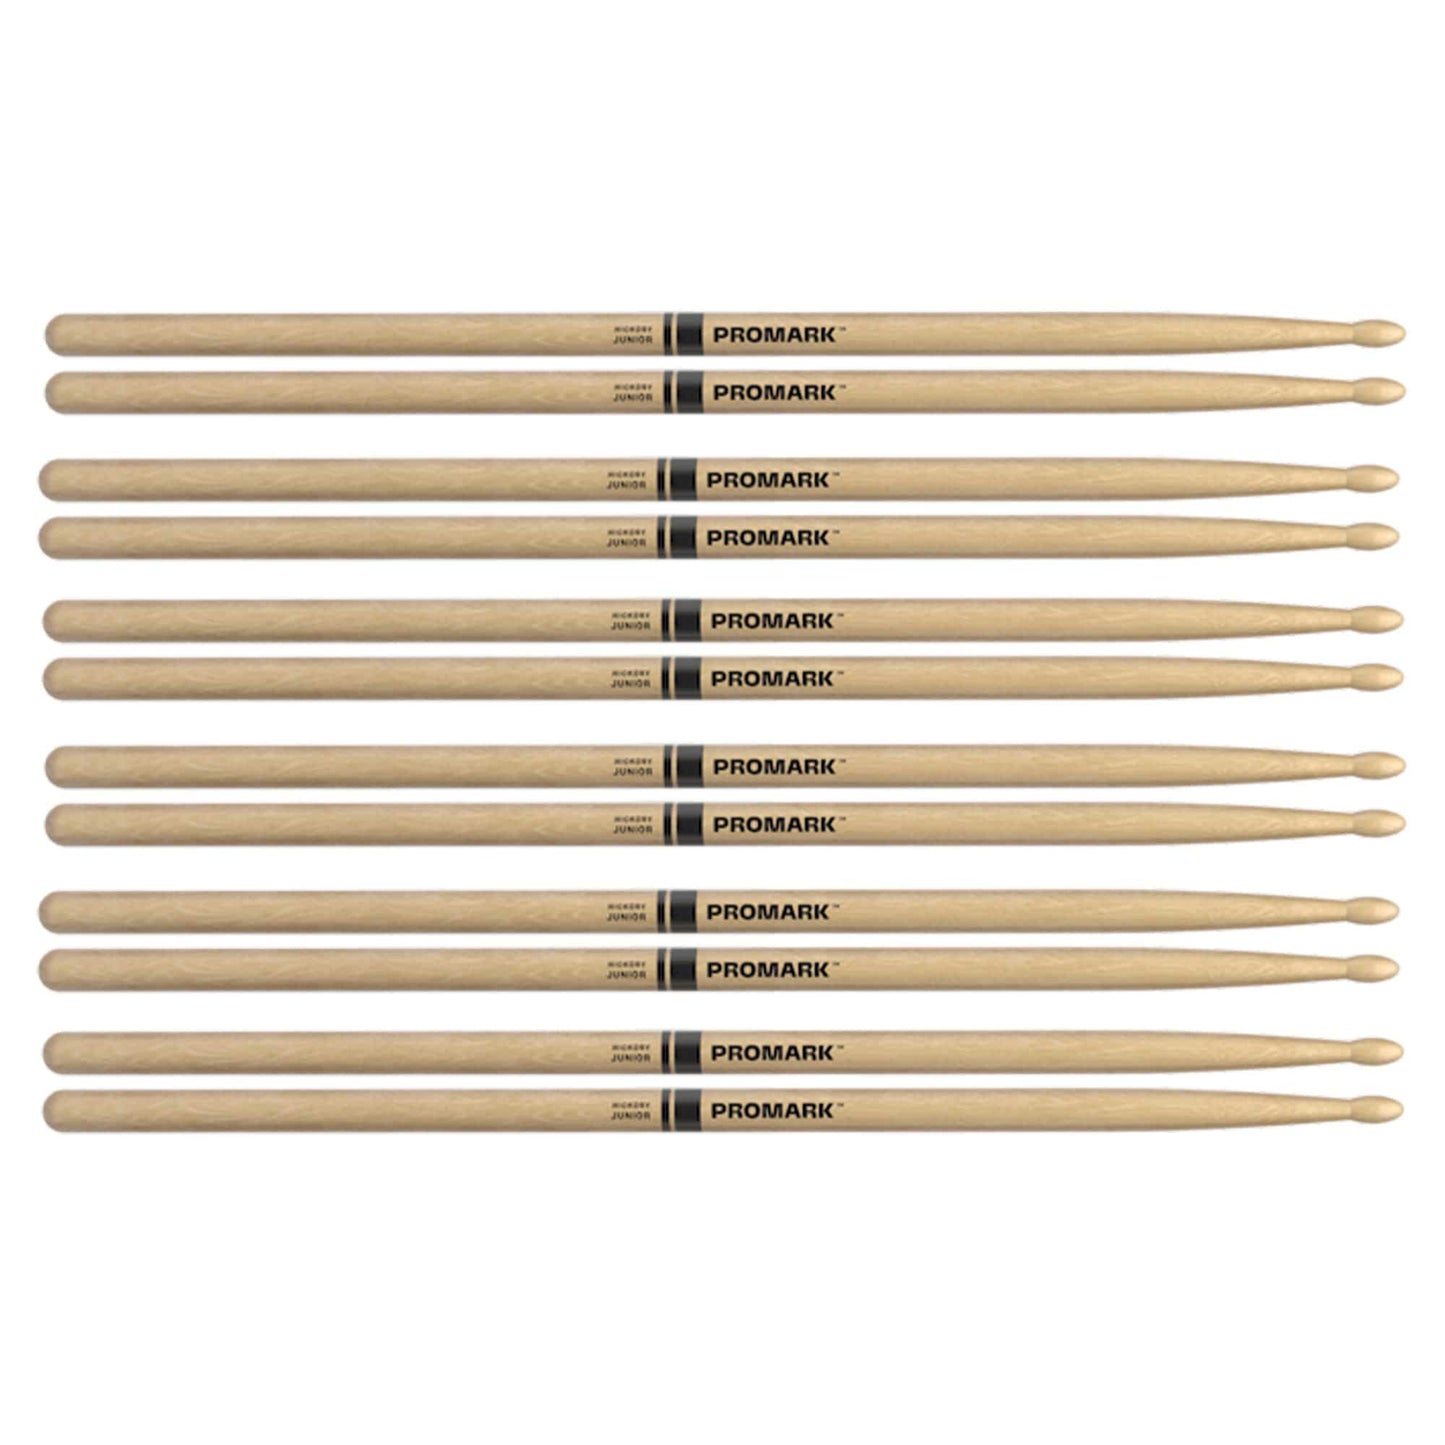 Promark American Hickory Junior Wood Tip Drum Sticks (6 Pair Bundle) Drums and Percussion / Parts and Accessories / Drum Sticks and Mallets